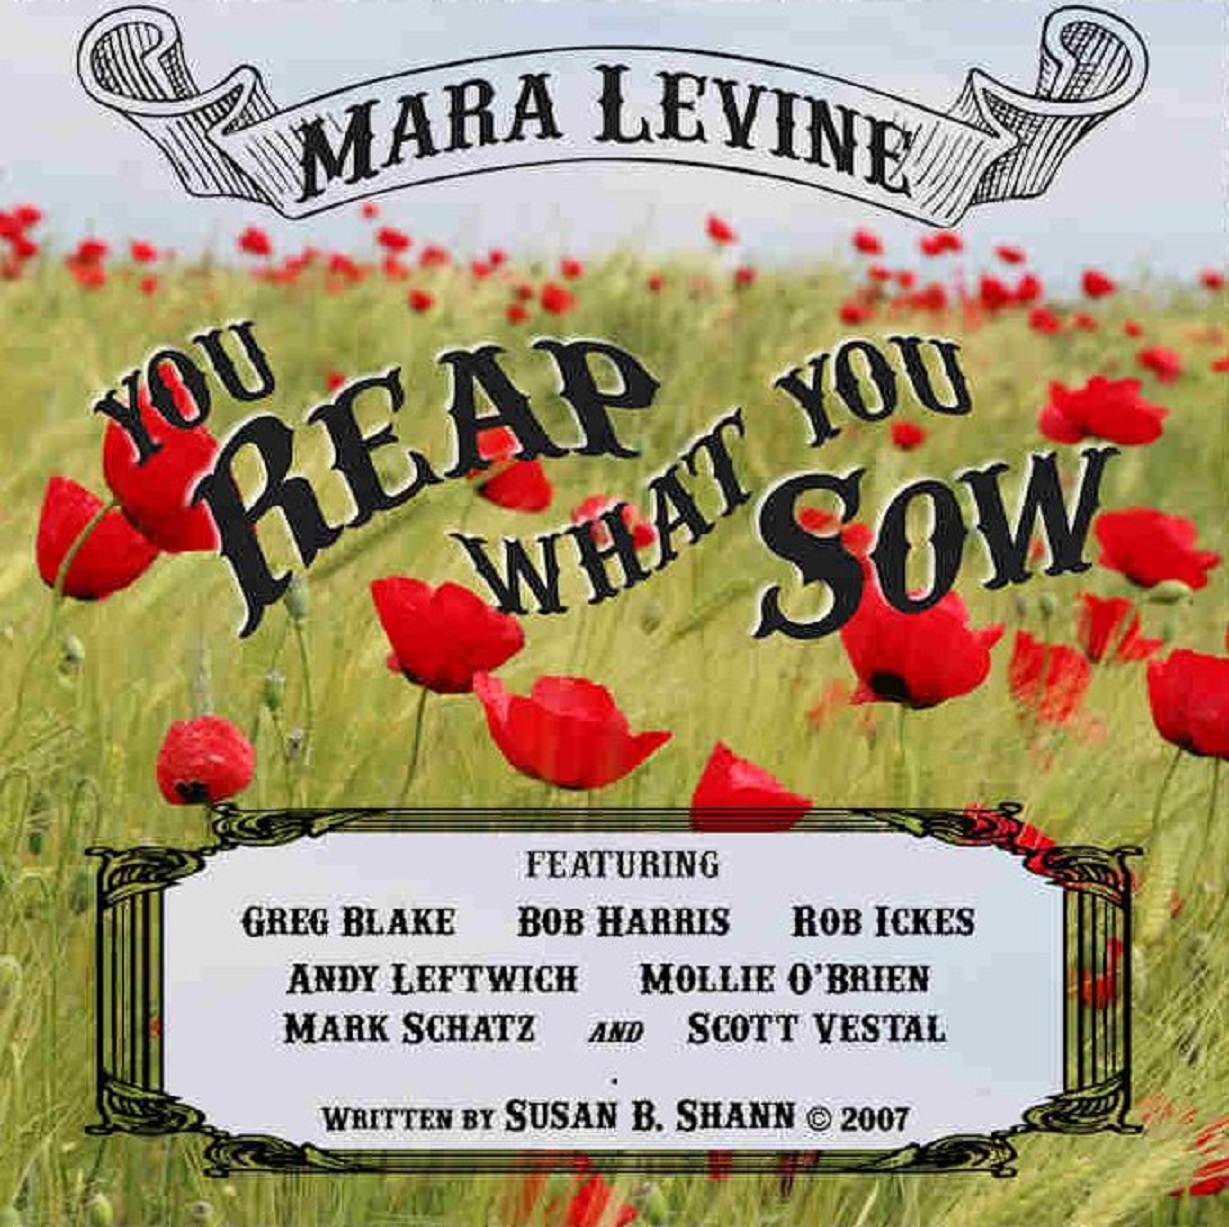 Mara Levine's You Reap What You Sow is #1